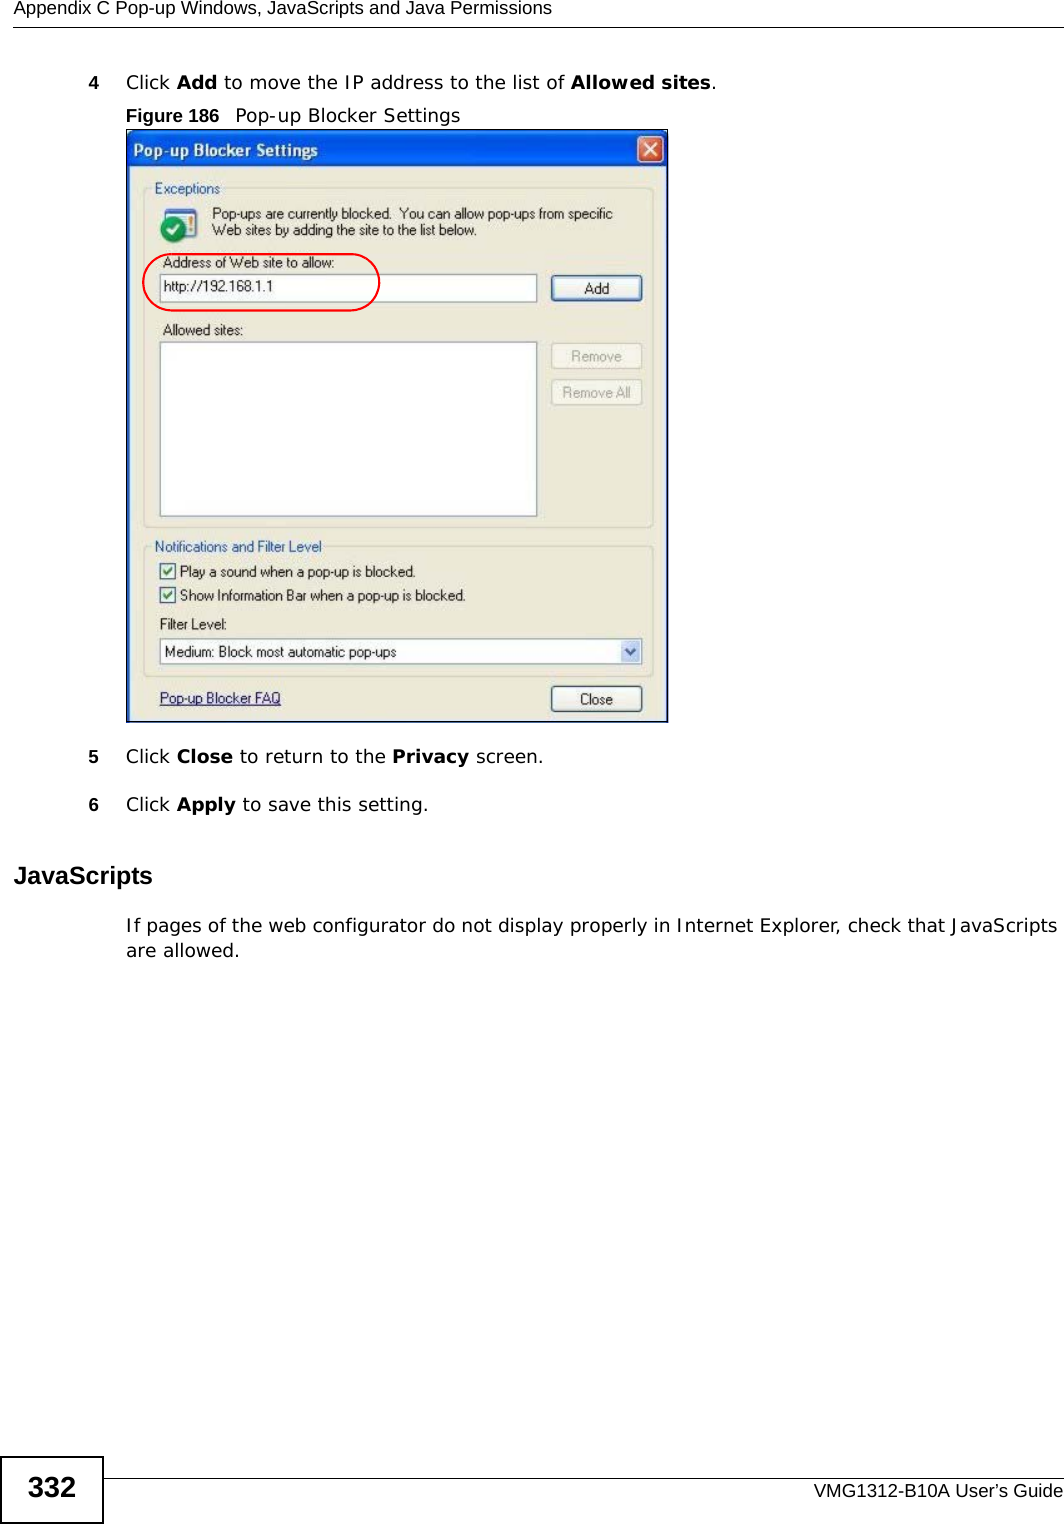 Appendix C Pop-up Windows, JavaScripts and Java PermissionsVMG1312-B10A User’s Guide3324Click Add to move the IP address to the list of Allowed sites.Figure 186   Pop-up Blocker Settings5Click Close to return to the Privacy screen. 6Click Apply to save this setting. JavaScriptsIf pages of the web configurator do not display properly in Internet Explorer, check that JavaScripts are allowed. 